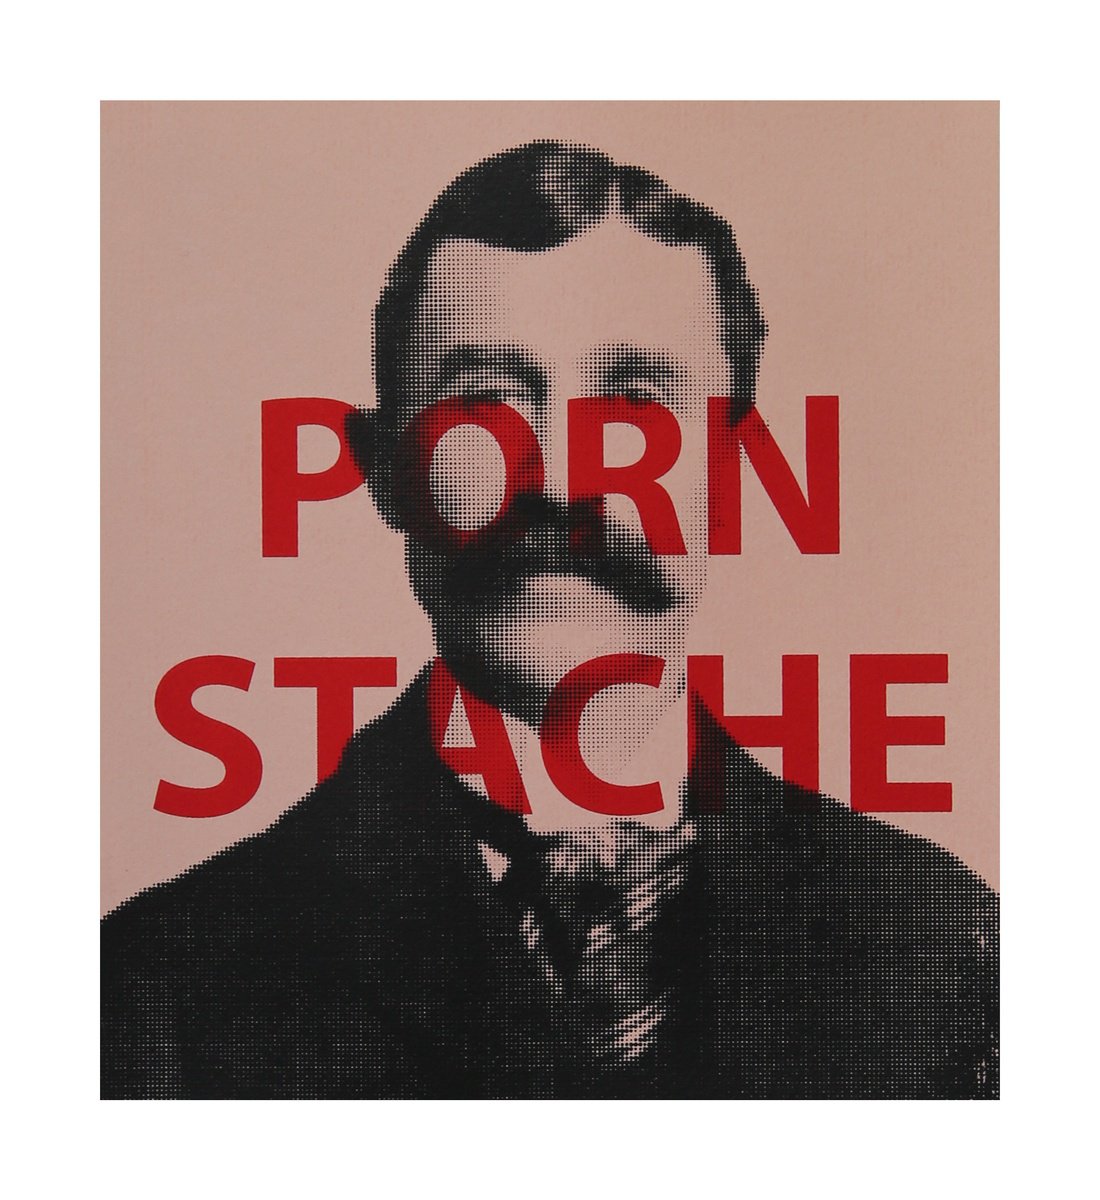 PORN STACHE (Light Pink & Fire Red) by AAWatson